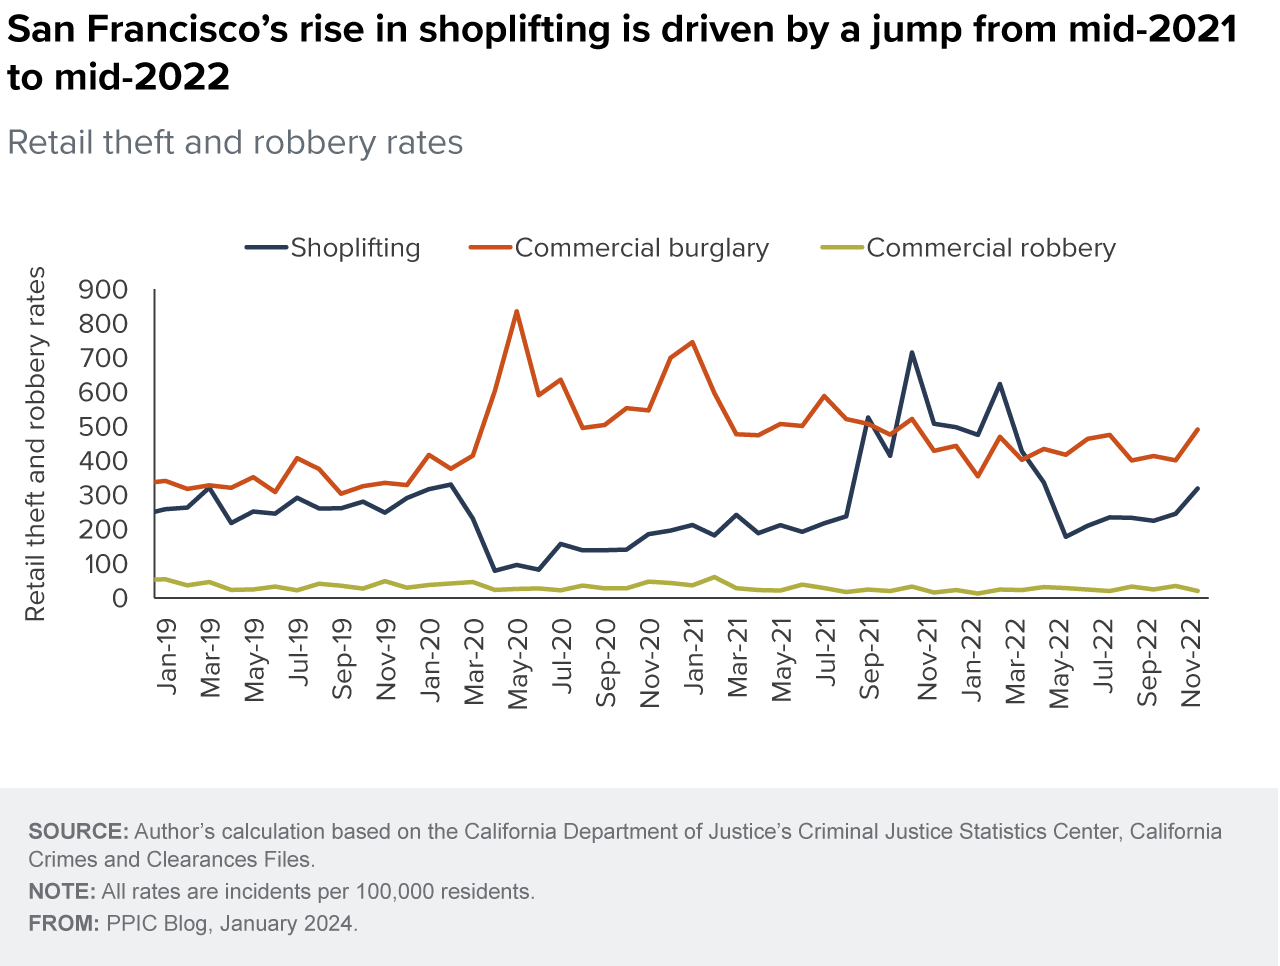 figure - San Francisco's rise in shoplifting is driven by a jump from mid-2021 to mid-2022